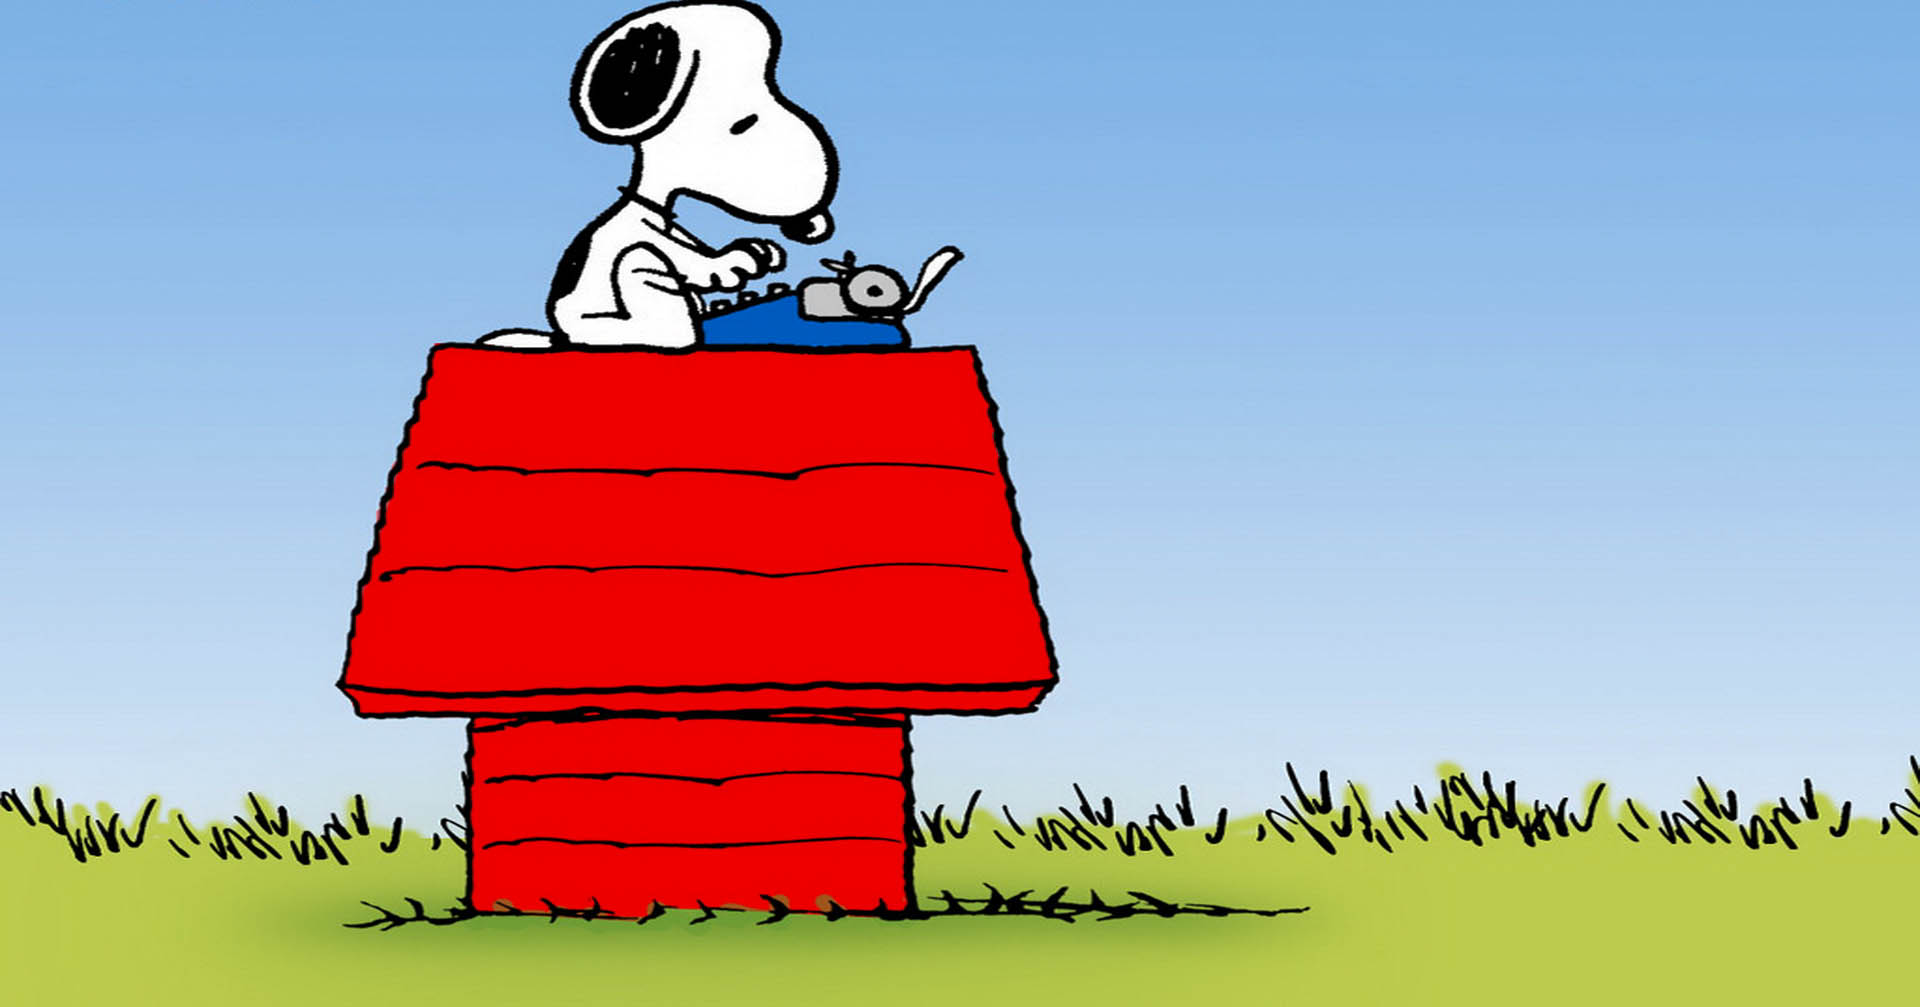 Free Snoopy Wallpaper - Snoopy Backgrounds For Computer - HD Wallpaper 